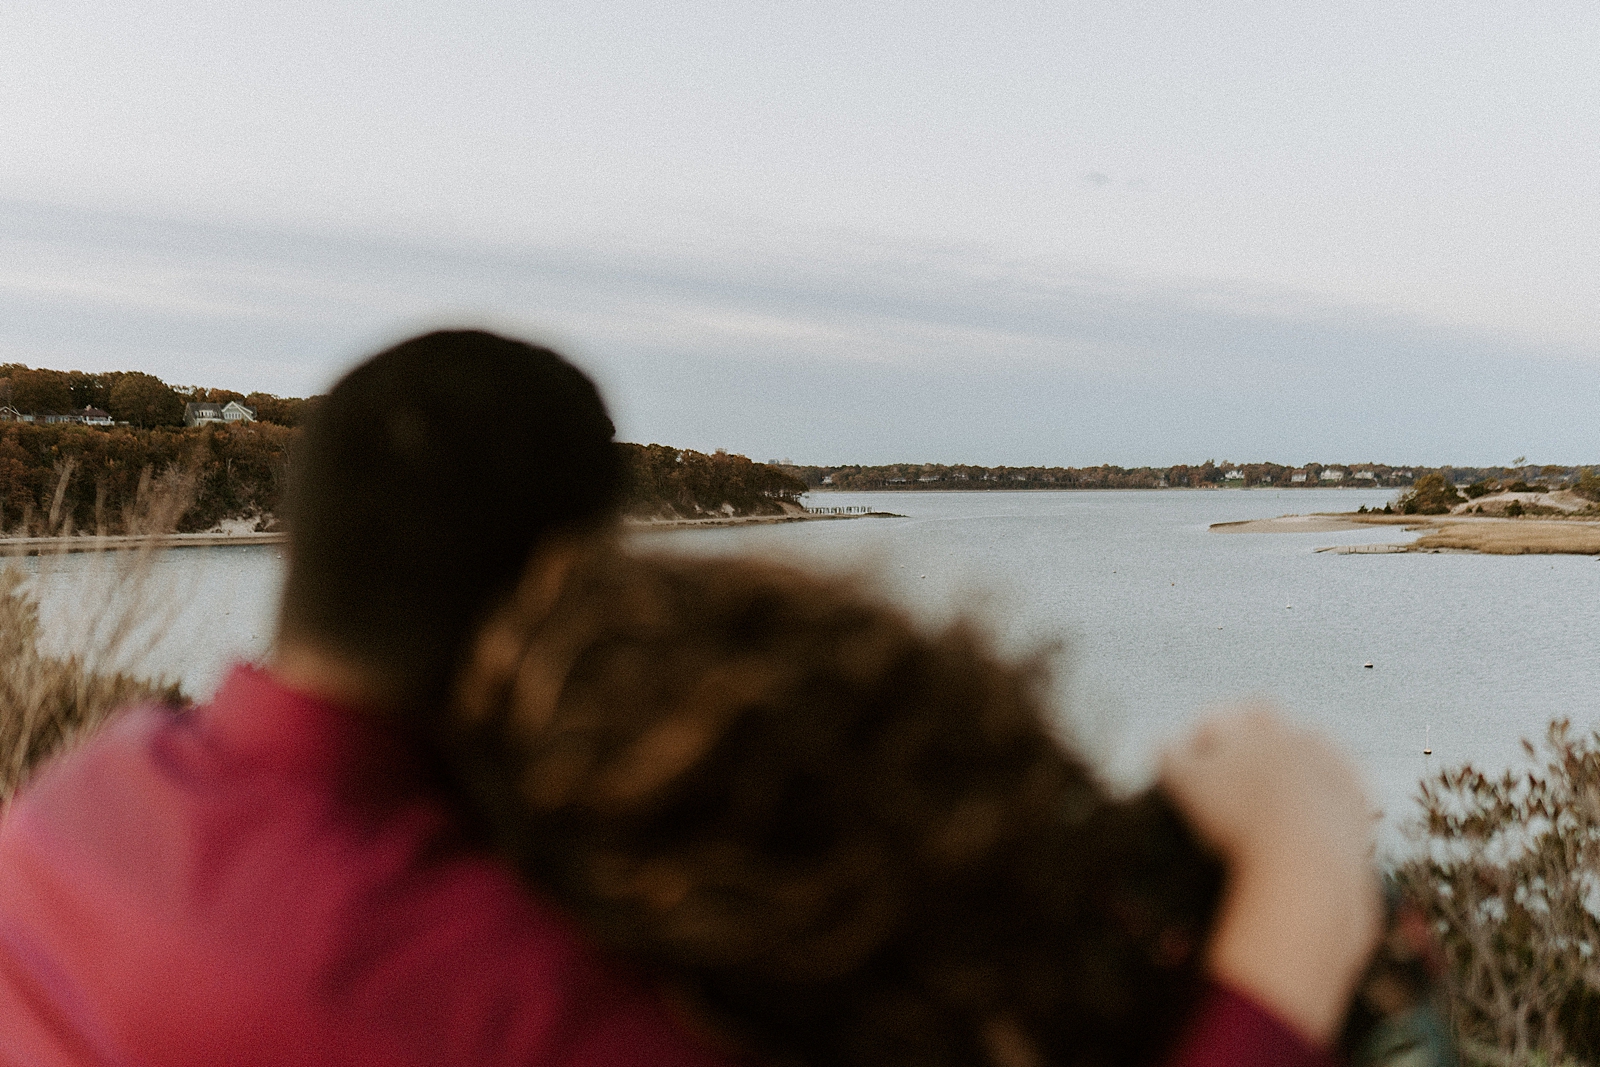 Couple holding each other and looking out to the water